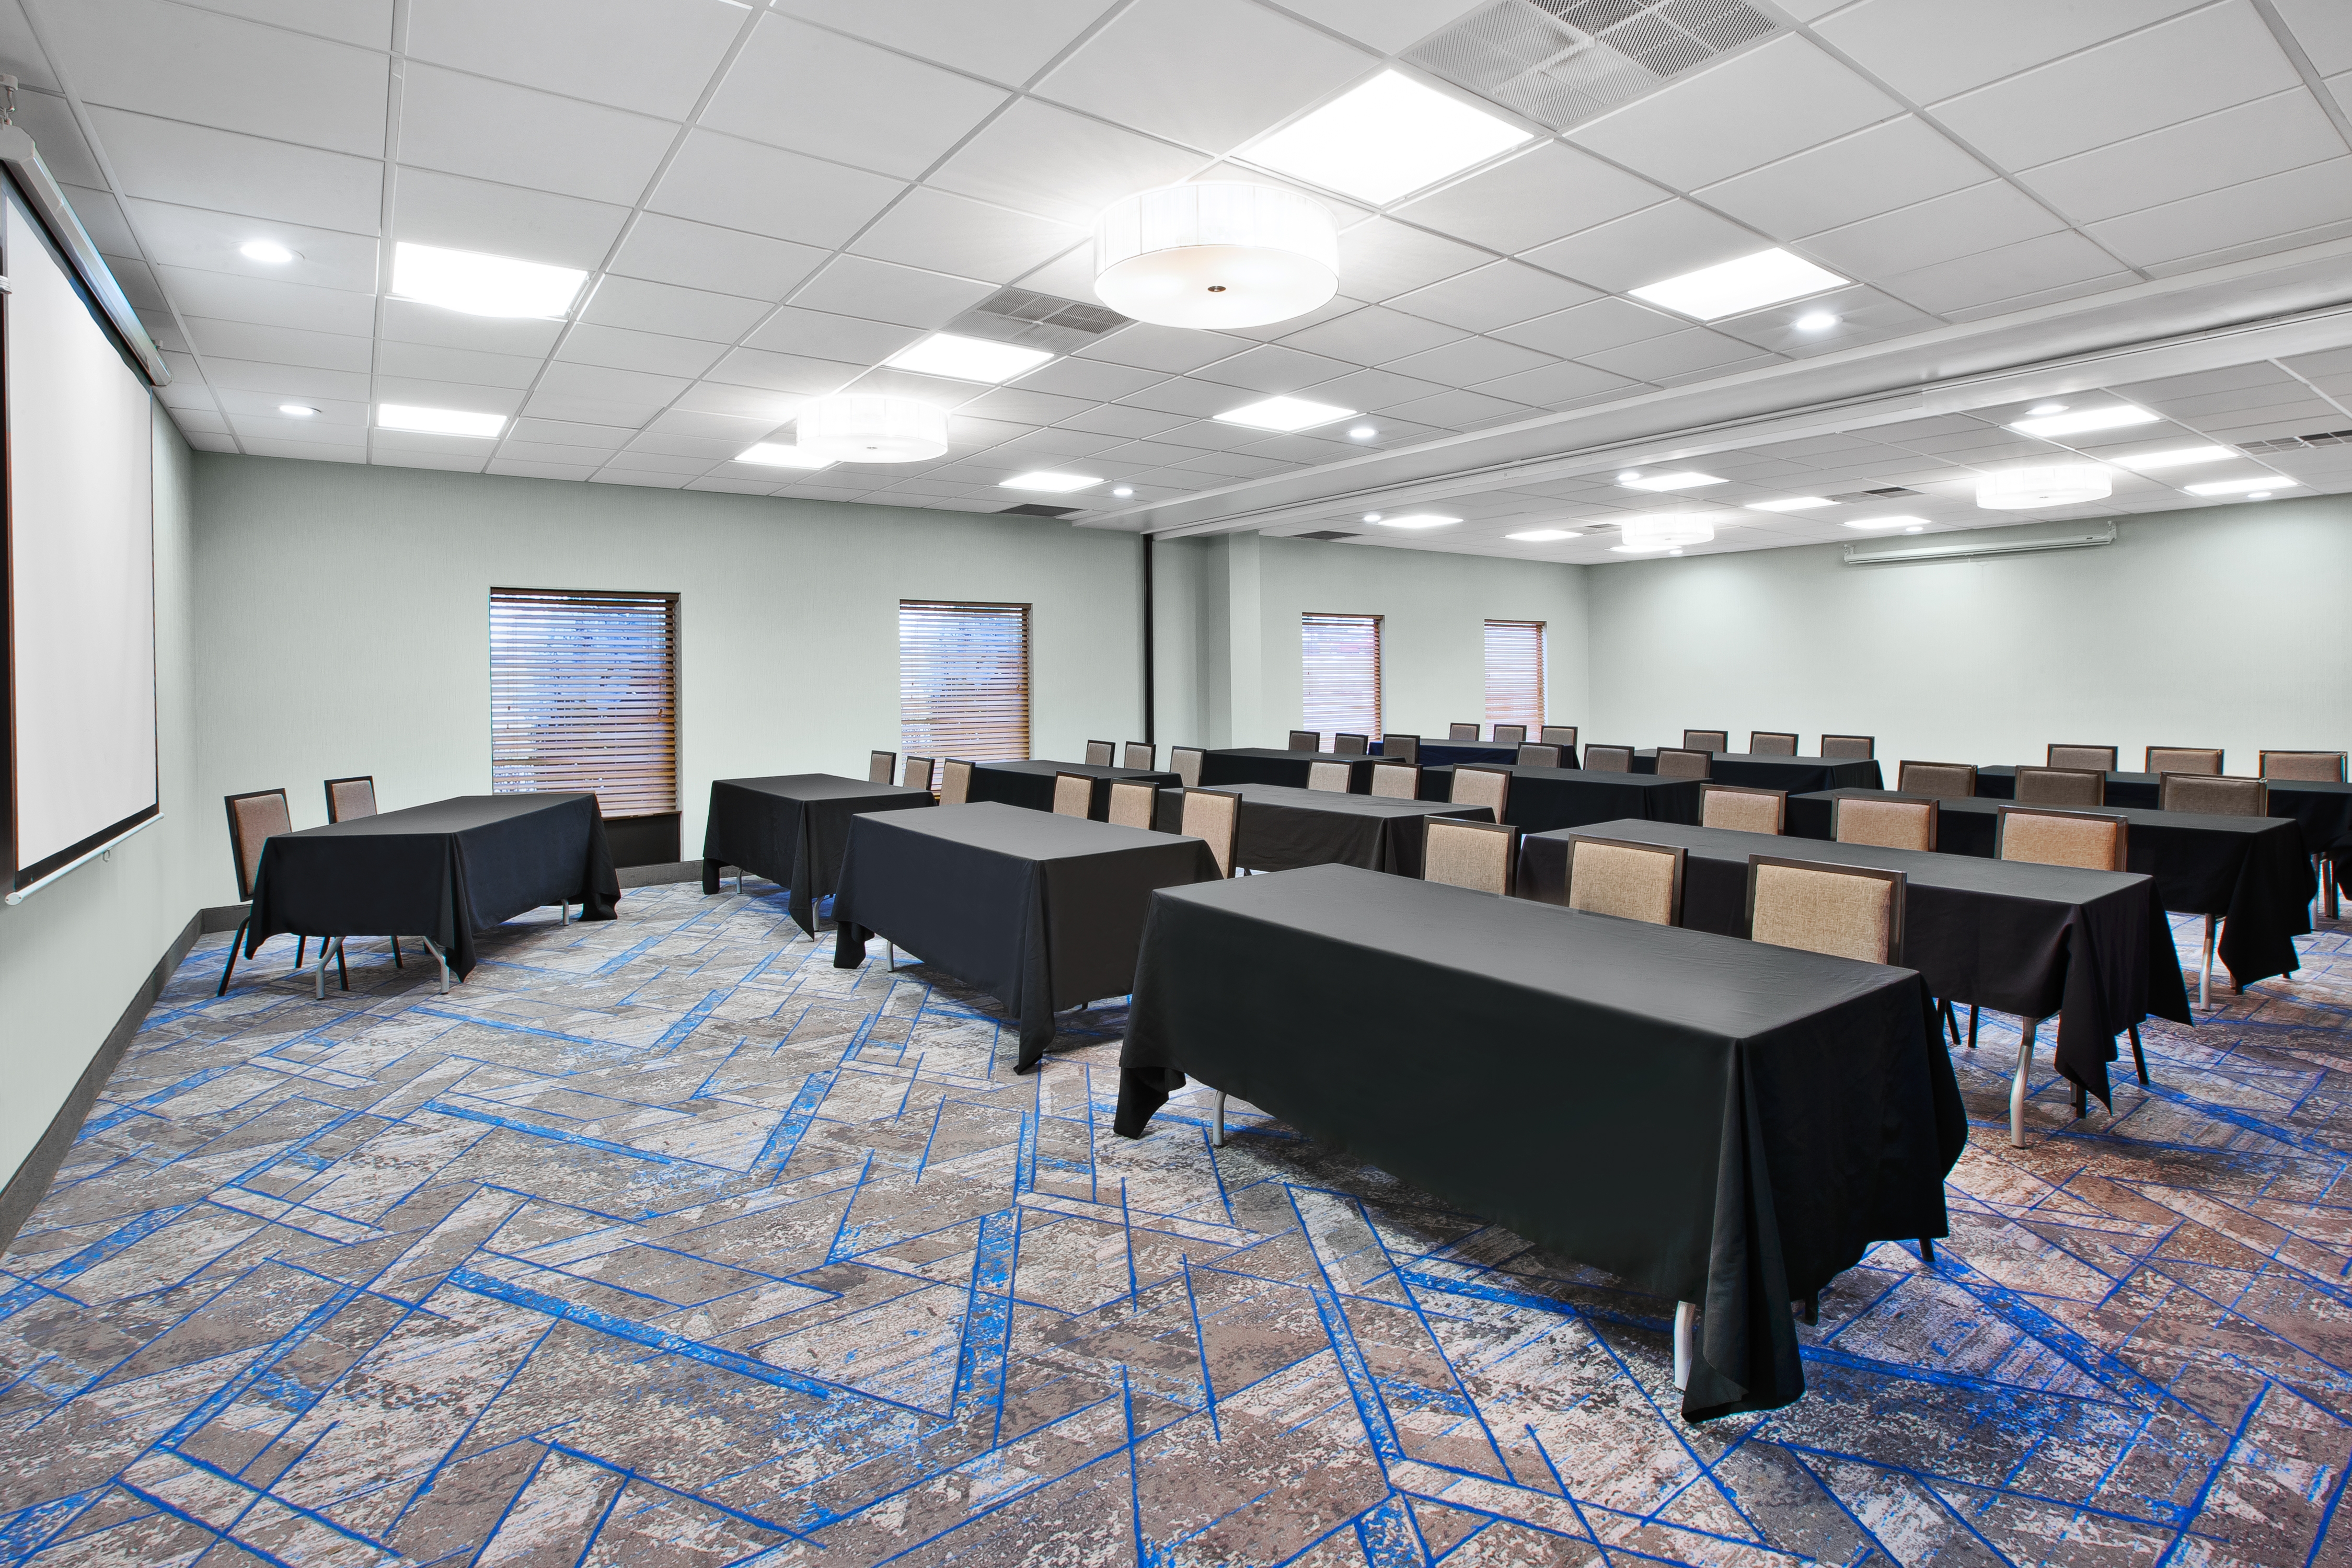 Meeting Room With Tables and Chairs in Classroom Style Setup and Projector Screen